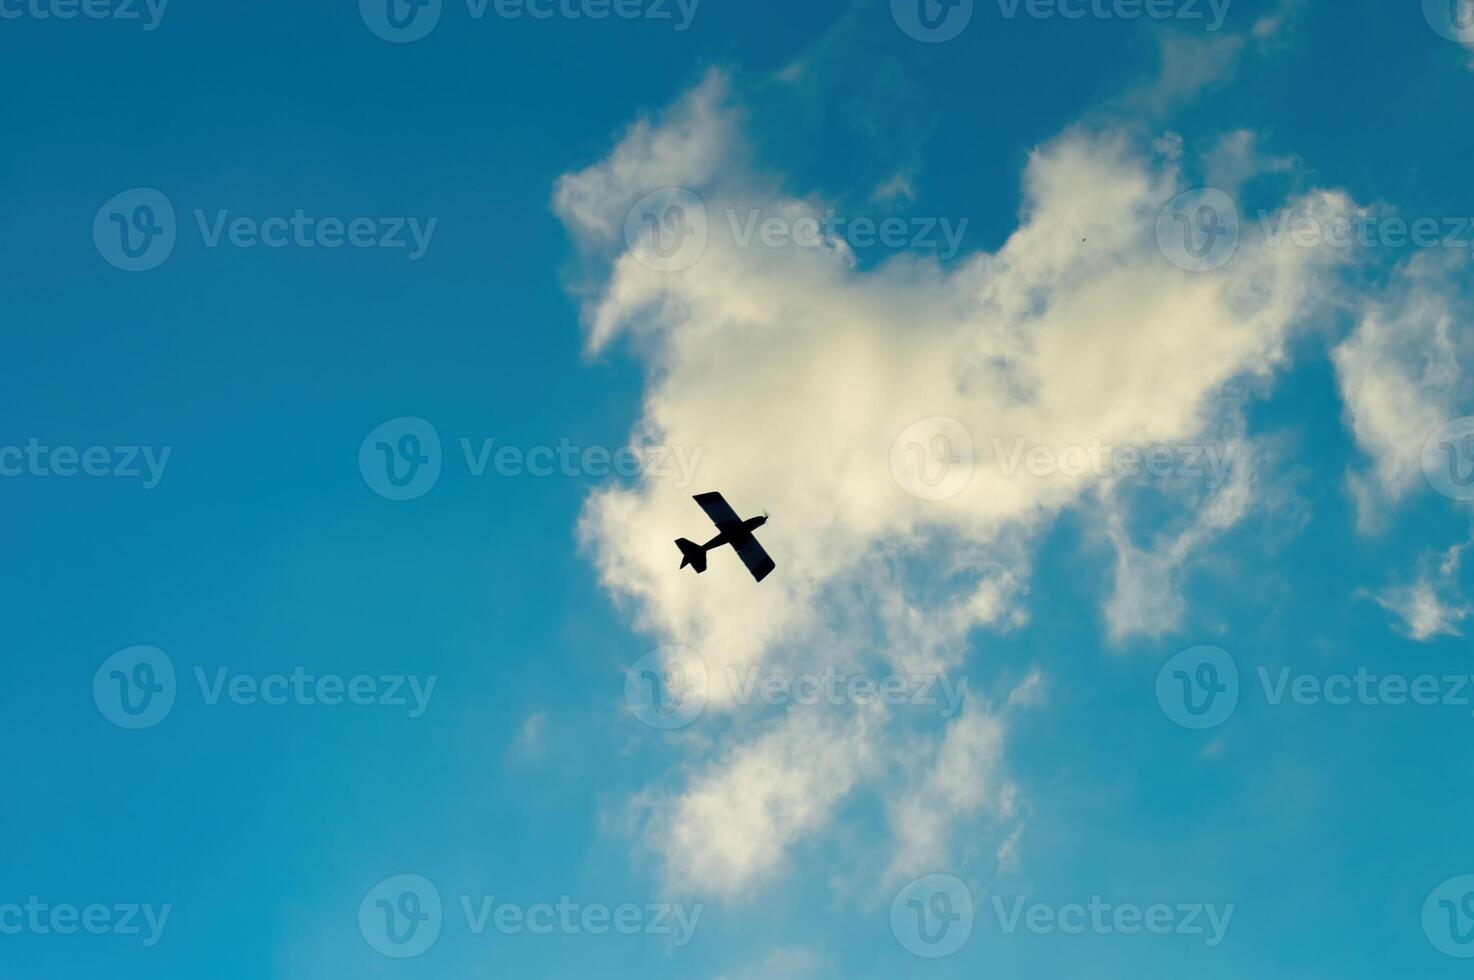 a remote control aeromodelling airplane on a cloudy blue sky background. perfect for background, texture, and aviation content photo